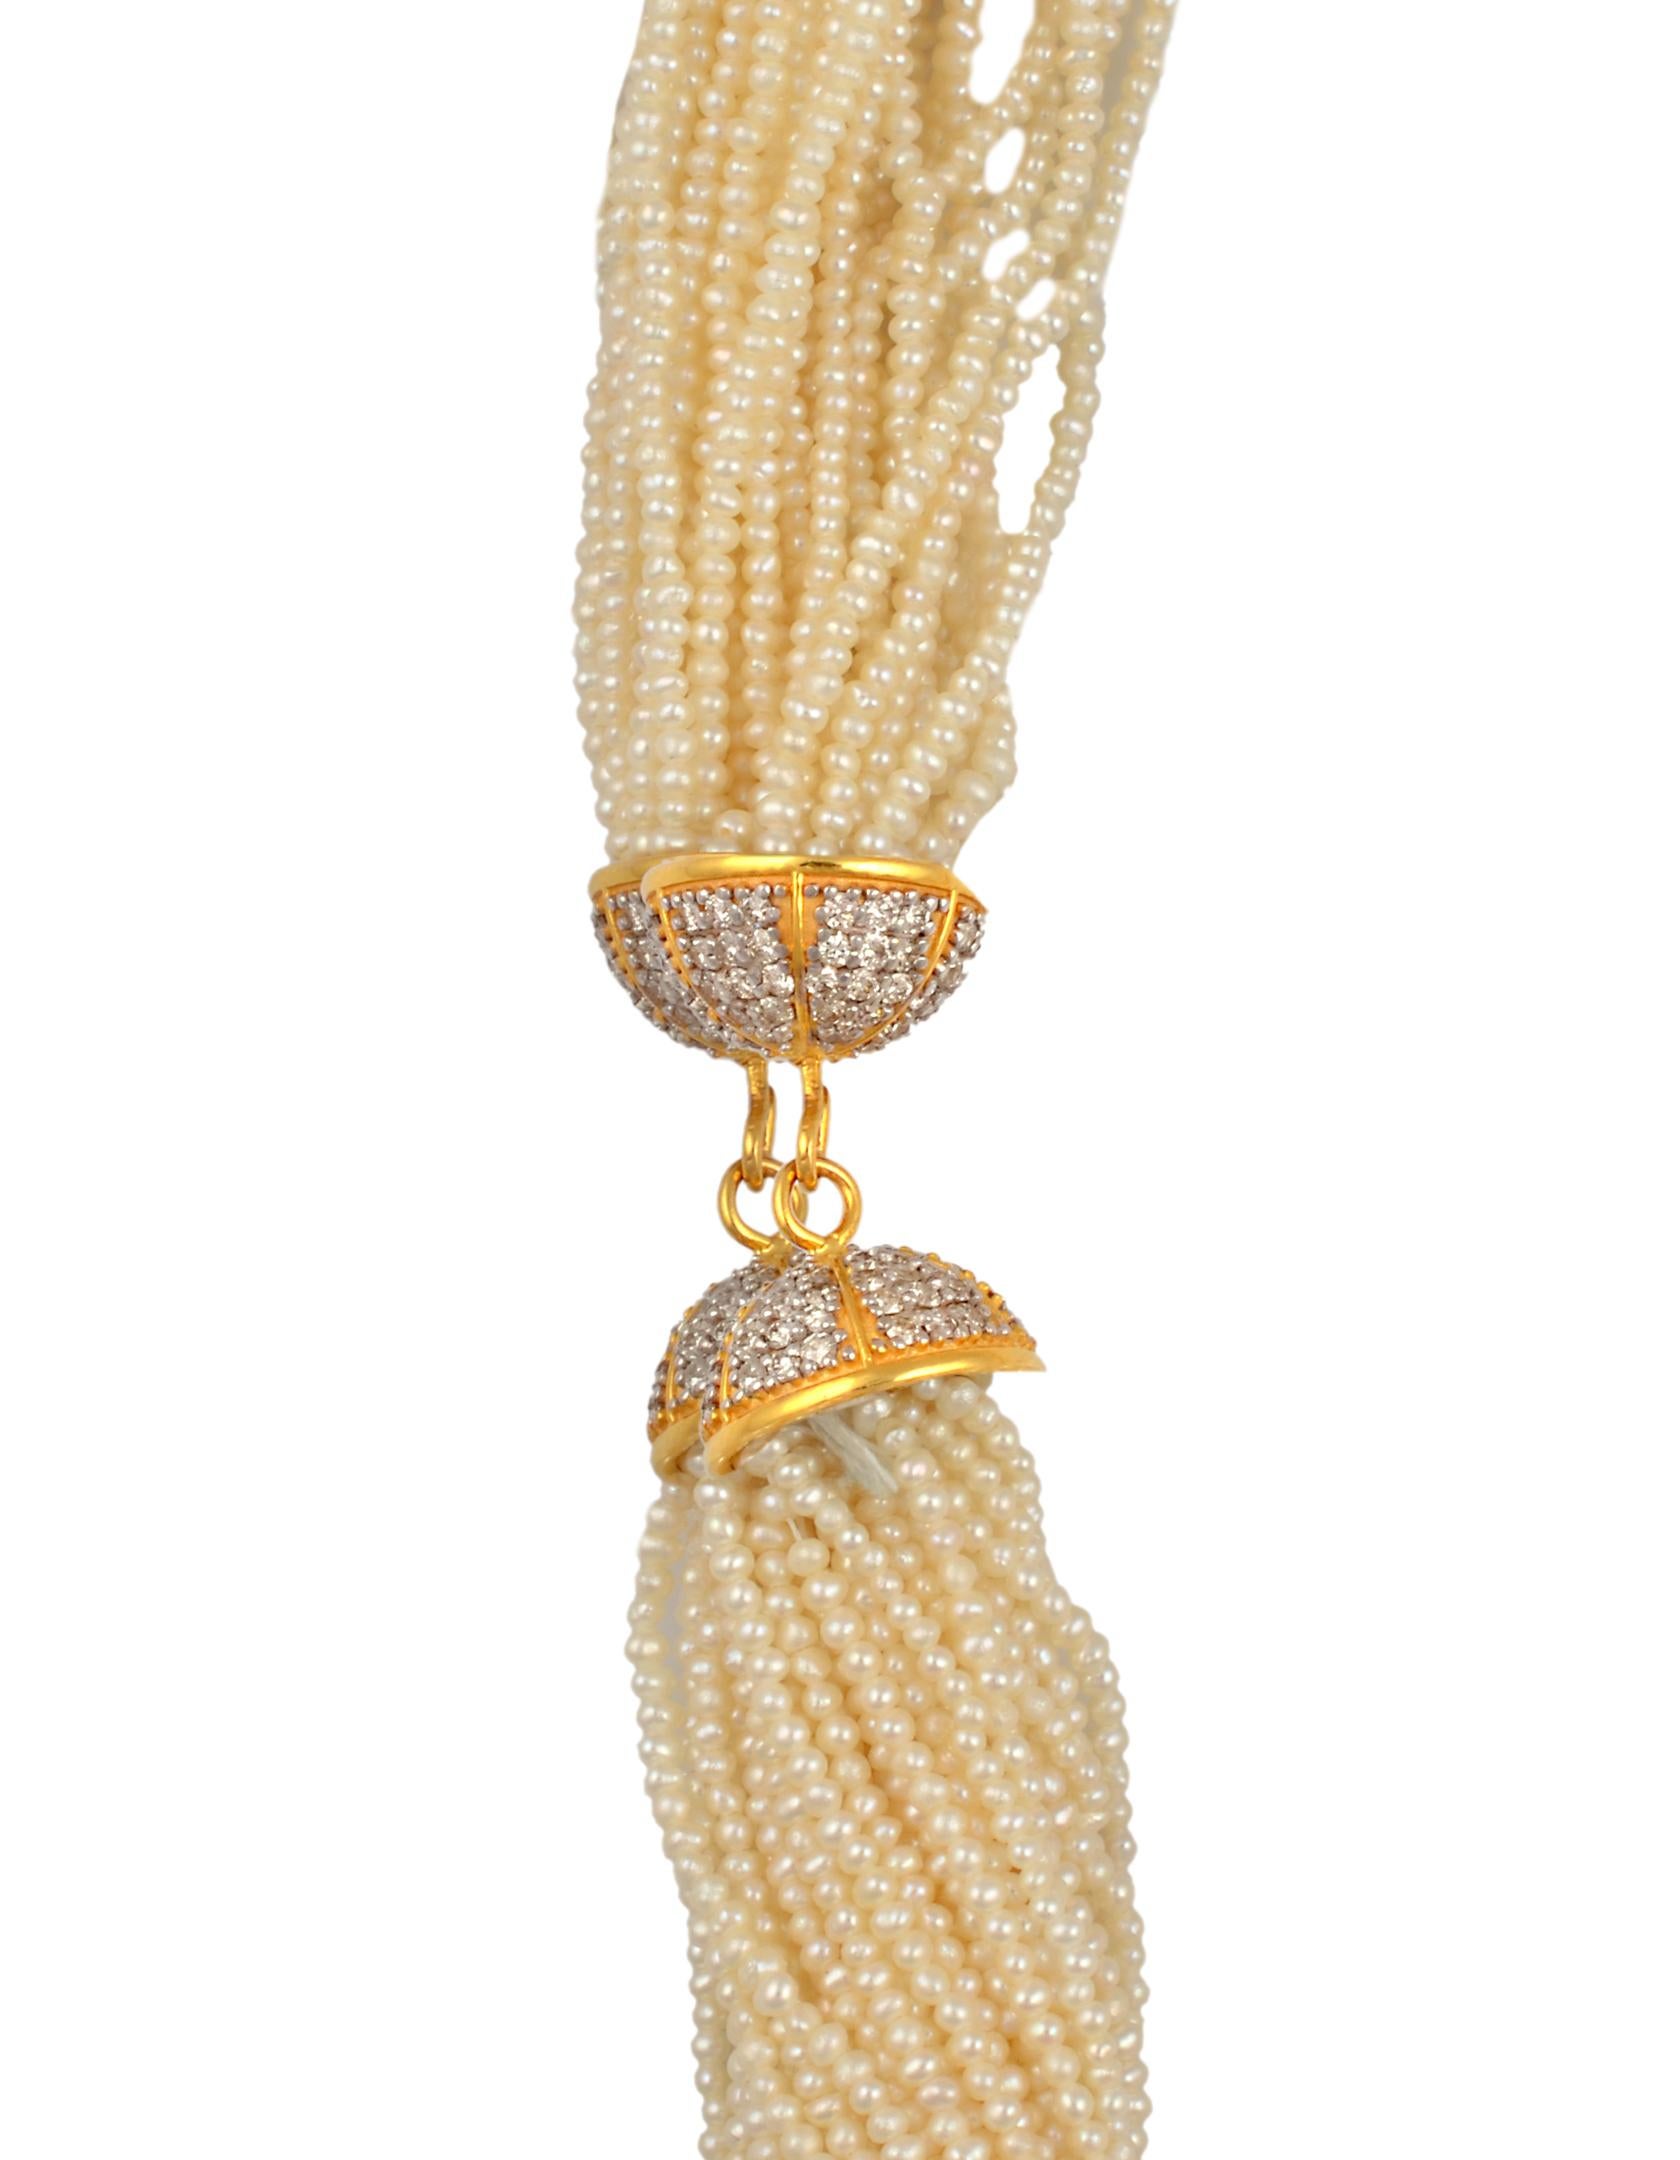 400 Carat Seed Pearl Necklace with Diamond & 14 Karat Yellow Gold Bell Cap Clasp For Sale 5